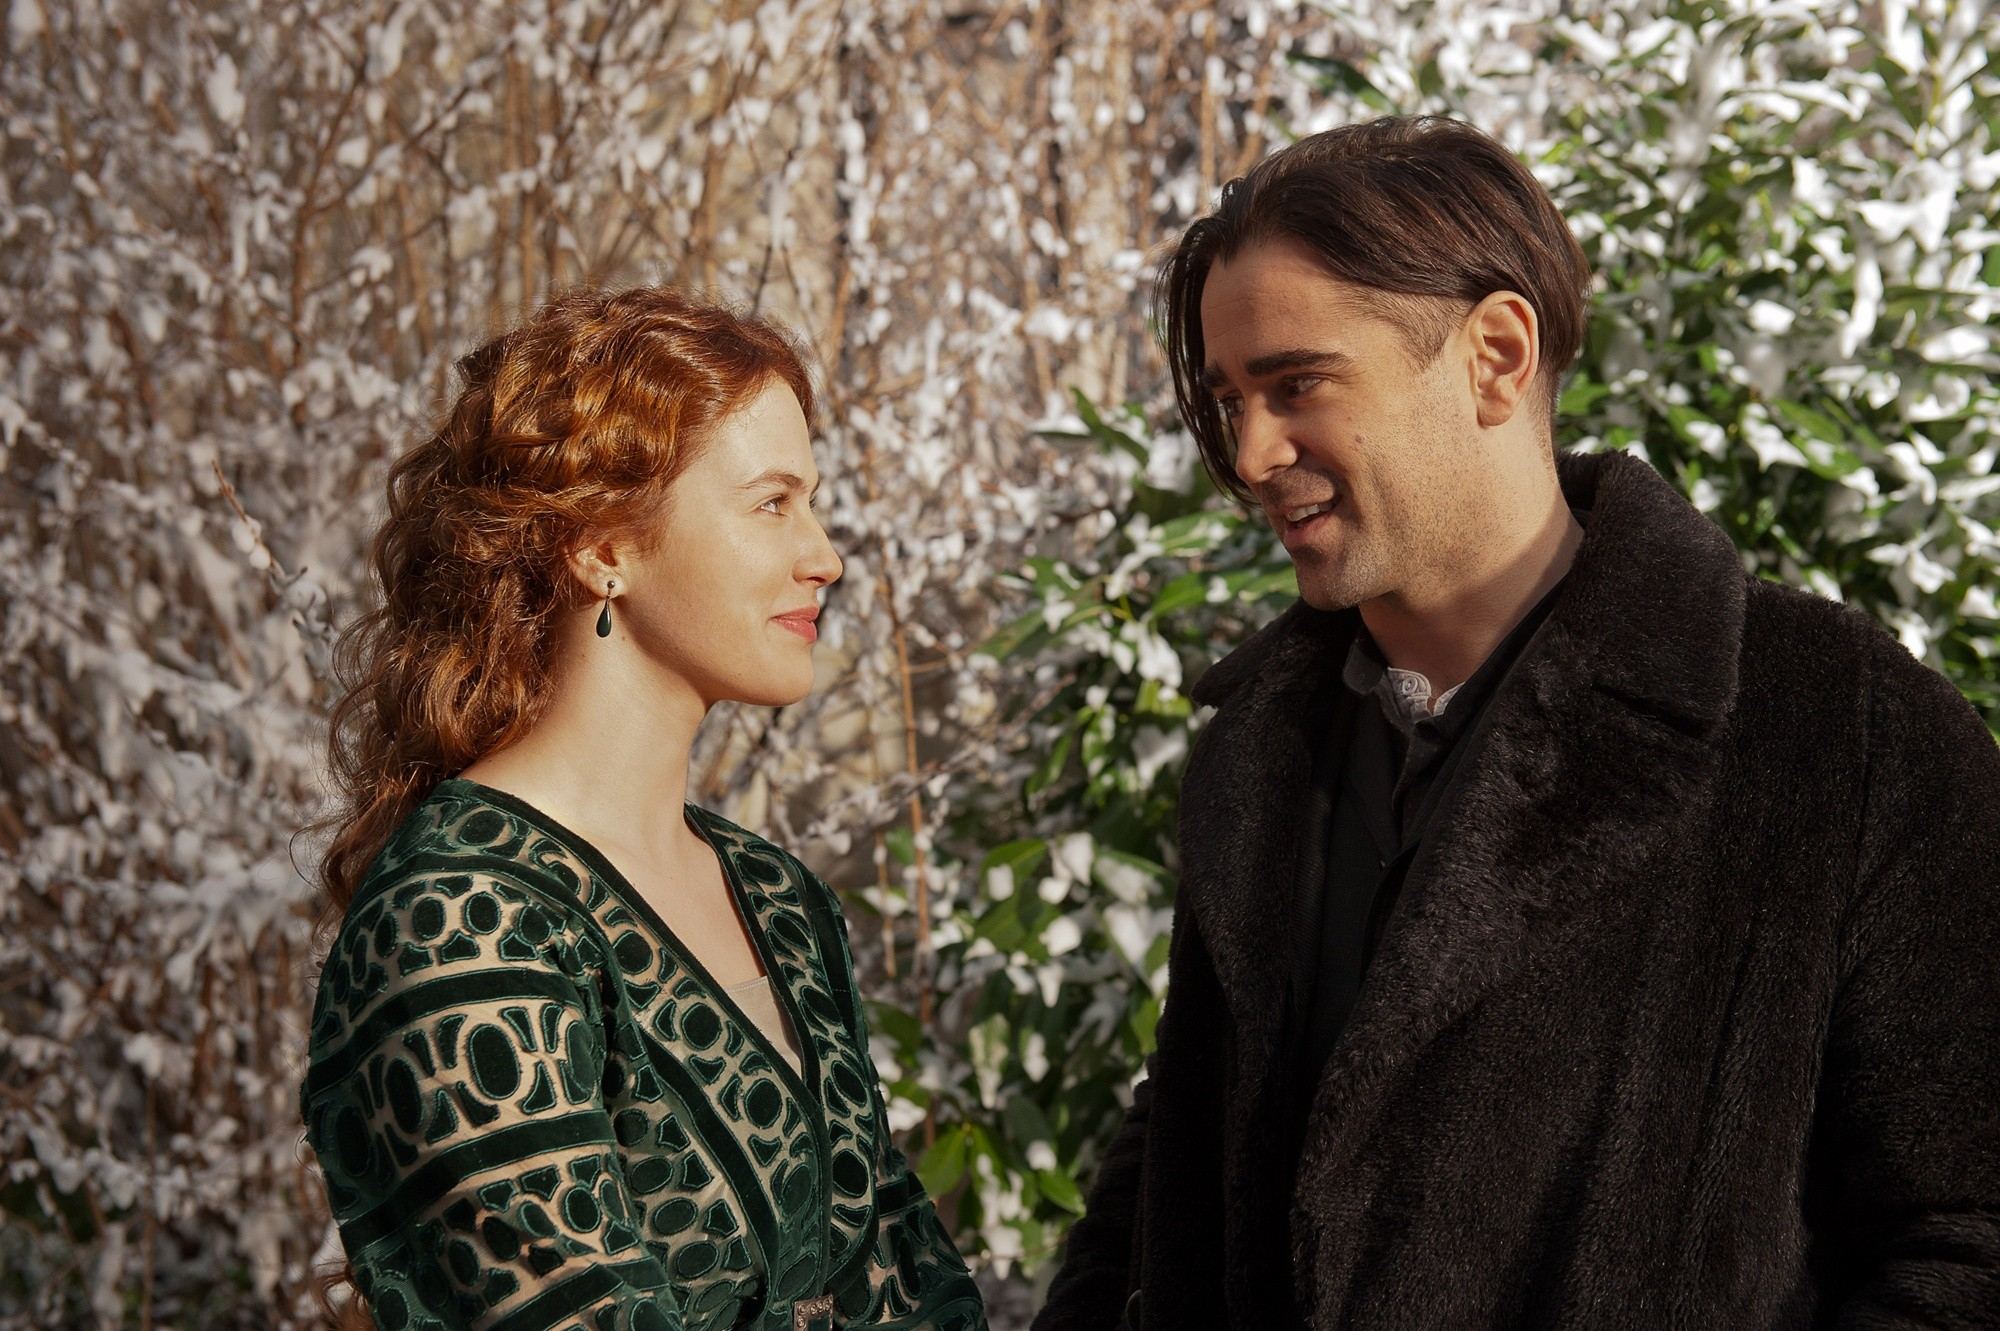 Jessica Brown Findlay stars as Beverly Penn and Colin Farrell stars as Peter Lake in Warner Bros. Pictures' Winter's Tale (2014)